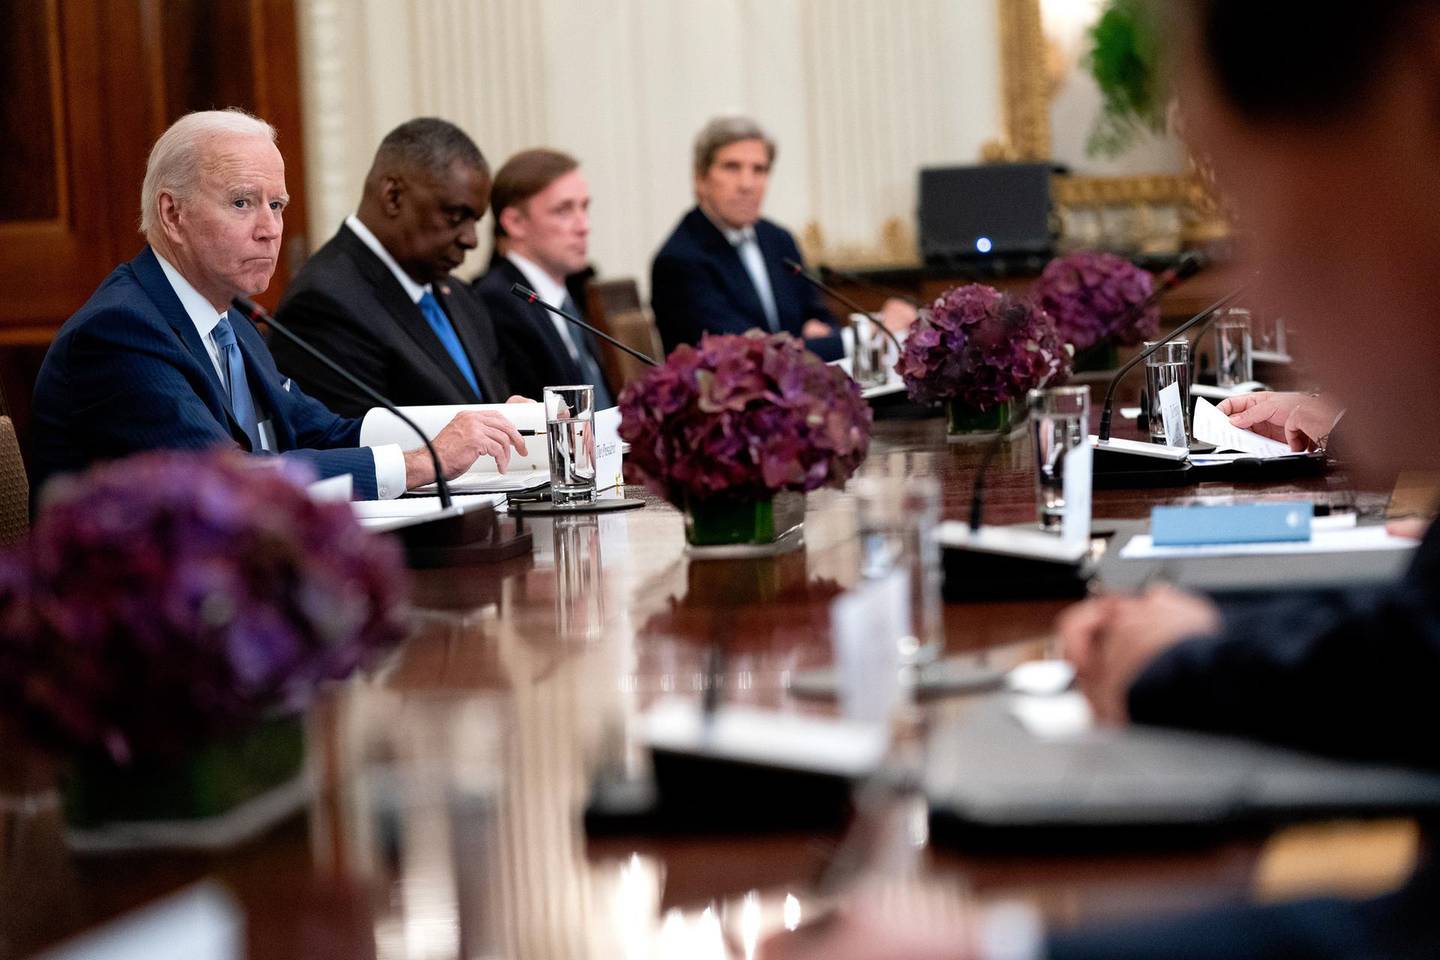 epa09218985 US President Joe Biden (L) listens during a bilateral meeting with South Korean President Moon Jae-in in the State Dining Room of the White House in Washington, DC, USA, 21 May 2021. Biden welcomed Moon for talks expected to span North Korea's nuclear program, a global semiconductor shortage and climate change.  EPA/Stefani Reynolds / POOL